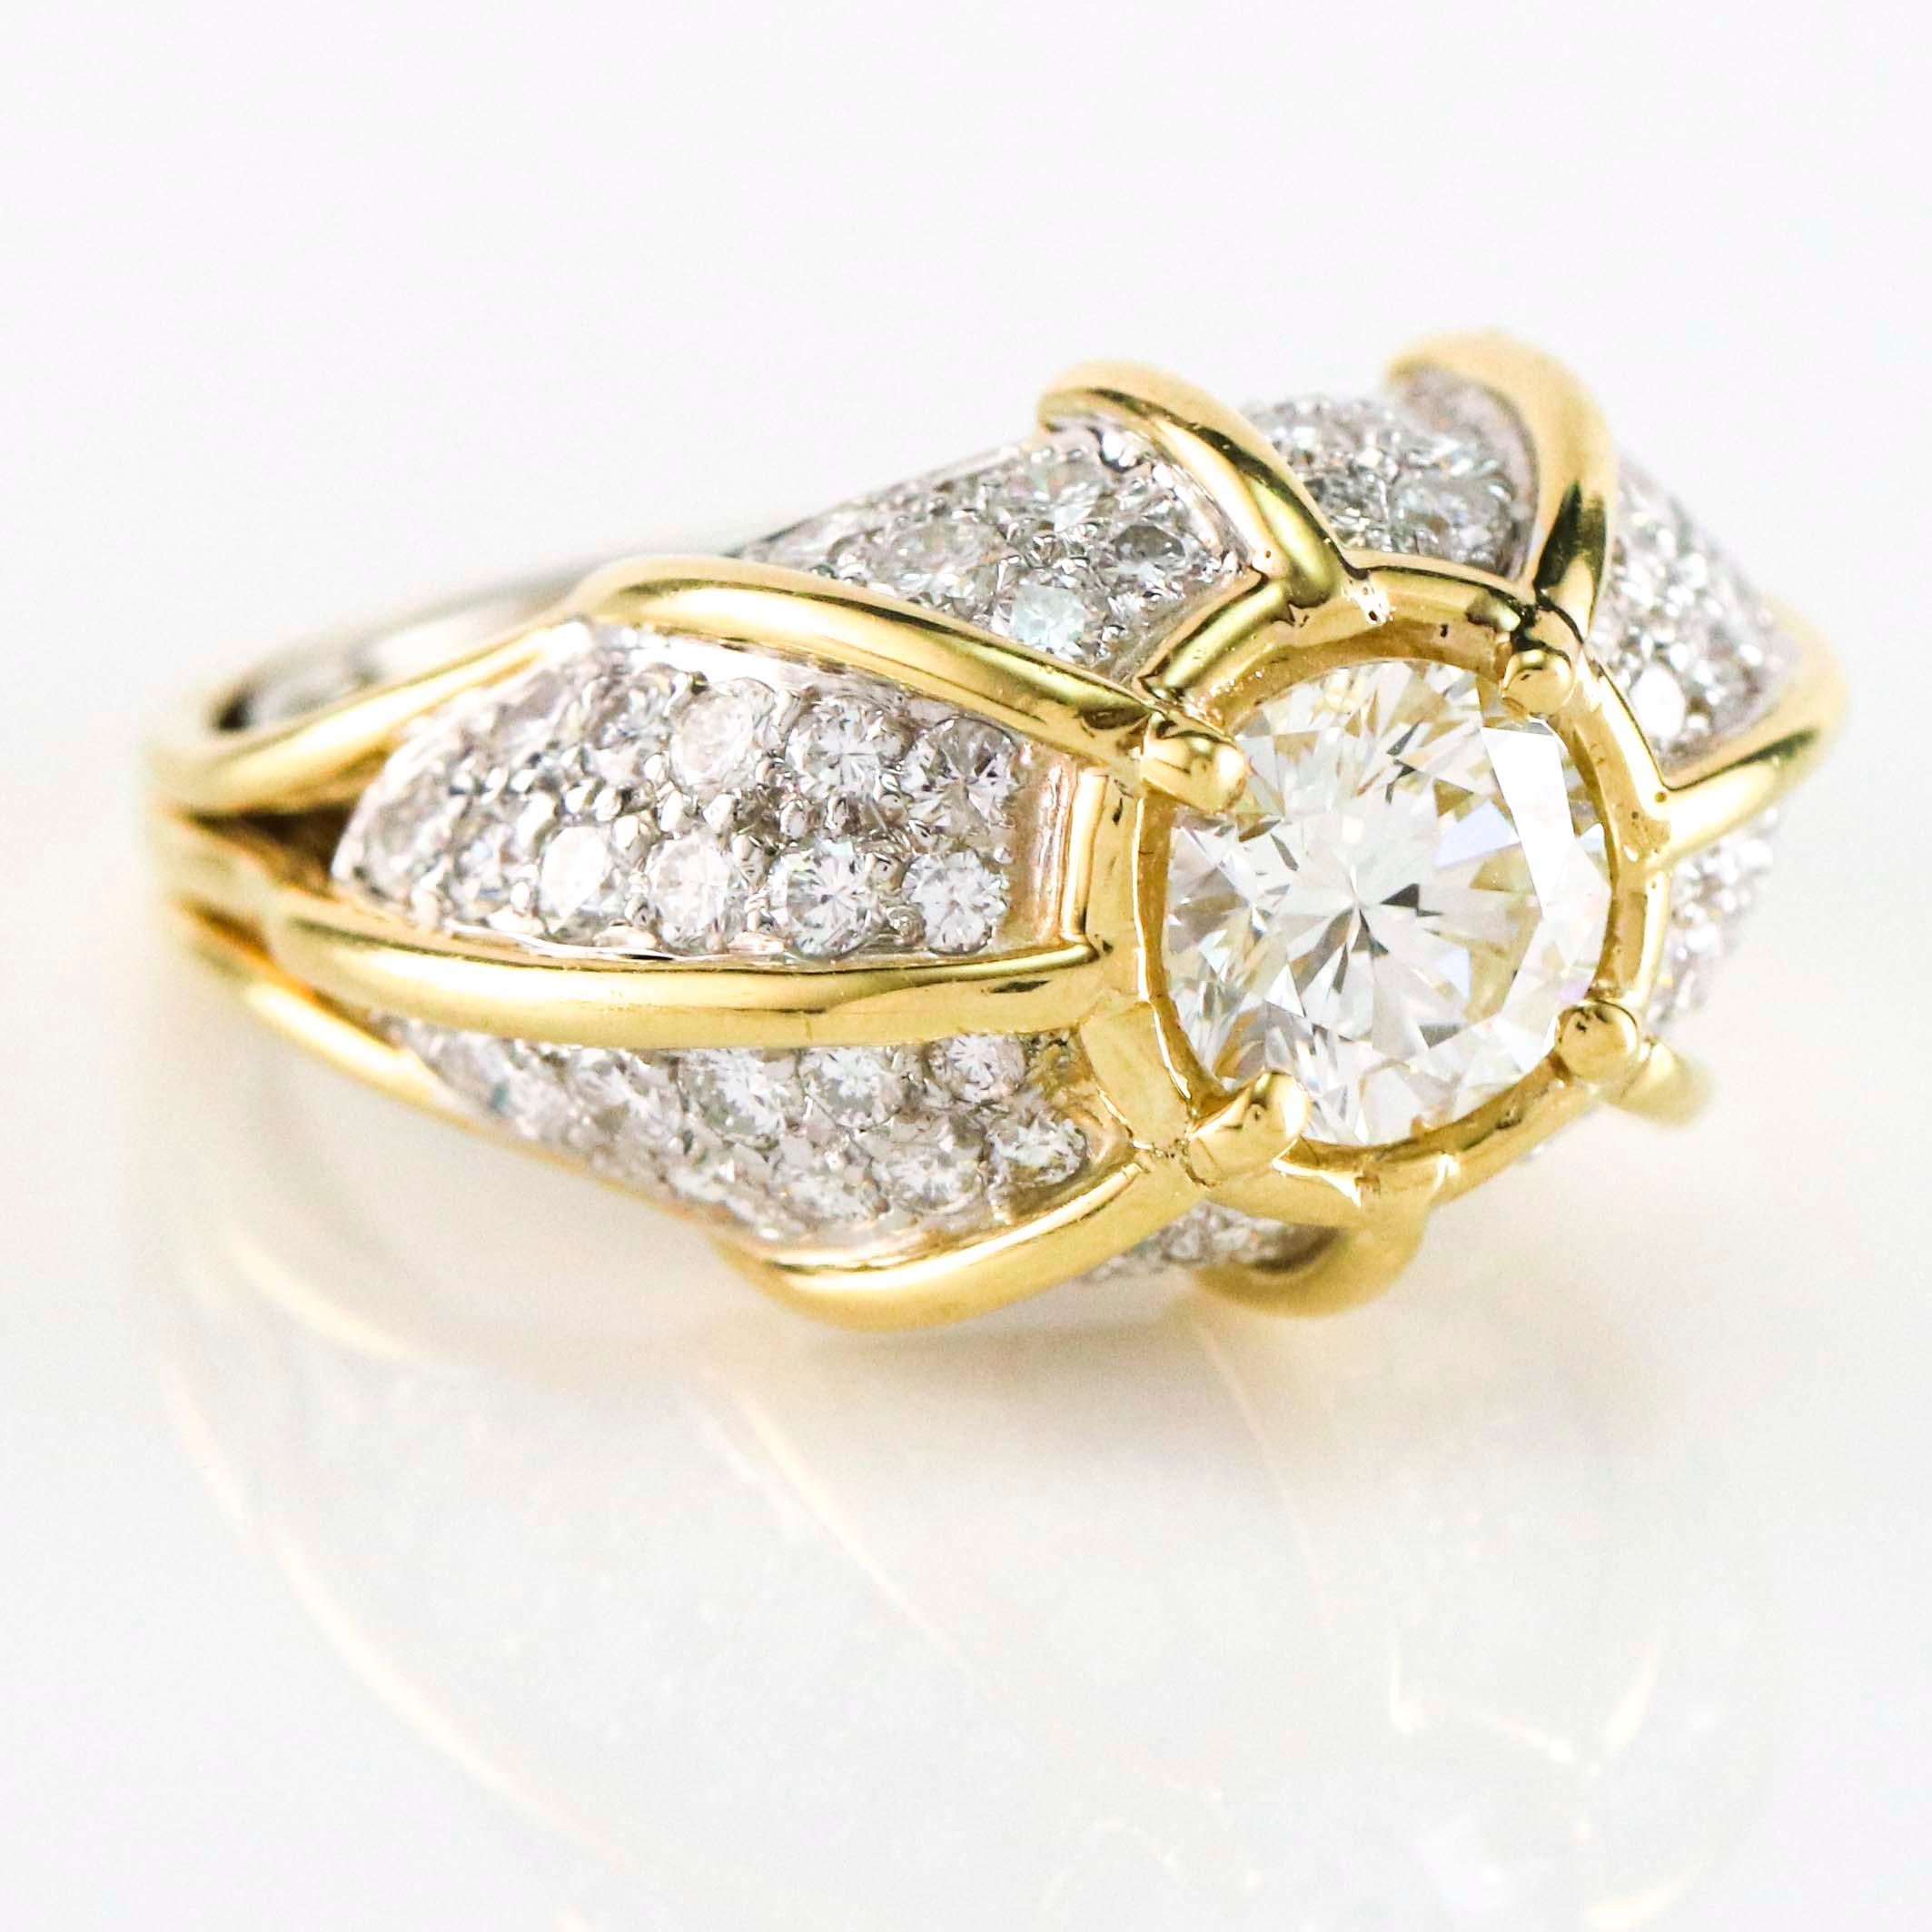 Dome ring bezel set with a 1.29 carat EGL certified round brilliant diamond, pave set with 2.40 carats of round diamonds crafted in 18 karat yellow gold and platinum. Size 6.75. Diamonds, VS-SI G-H.